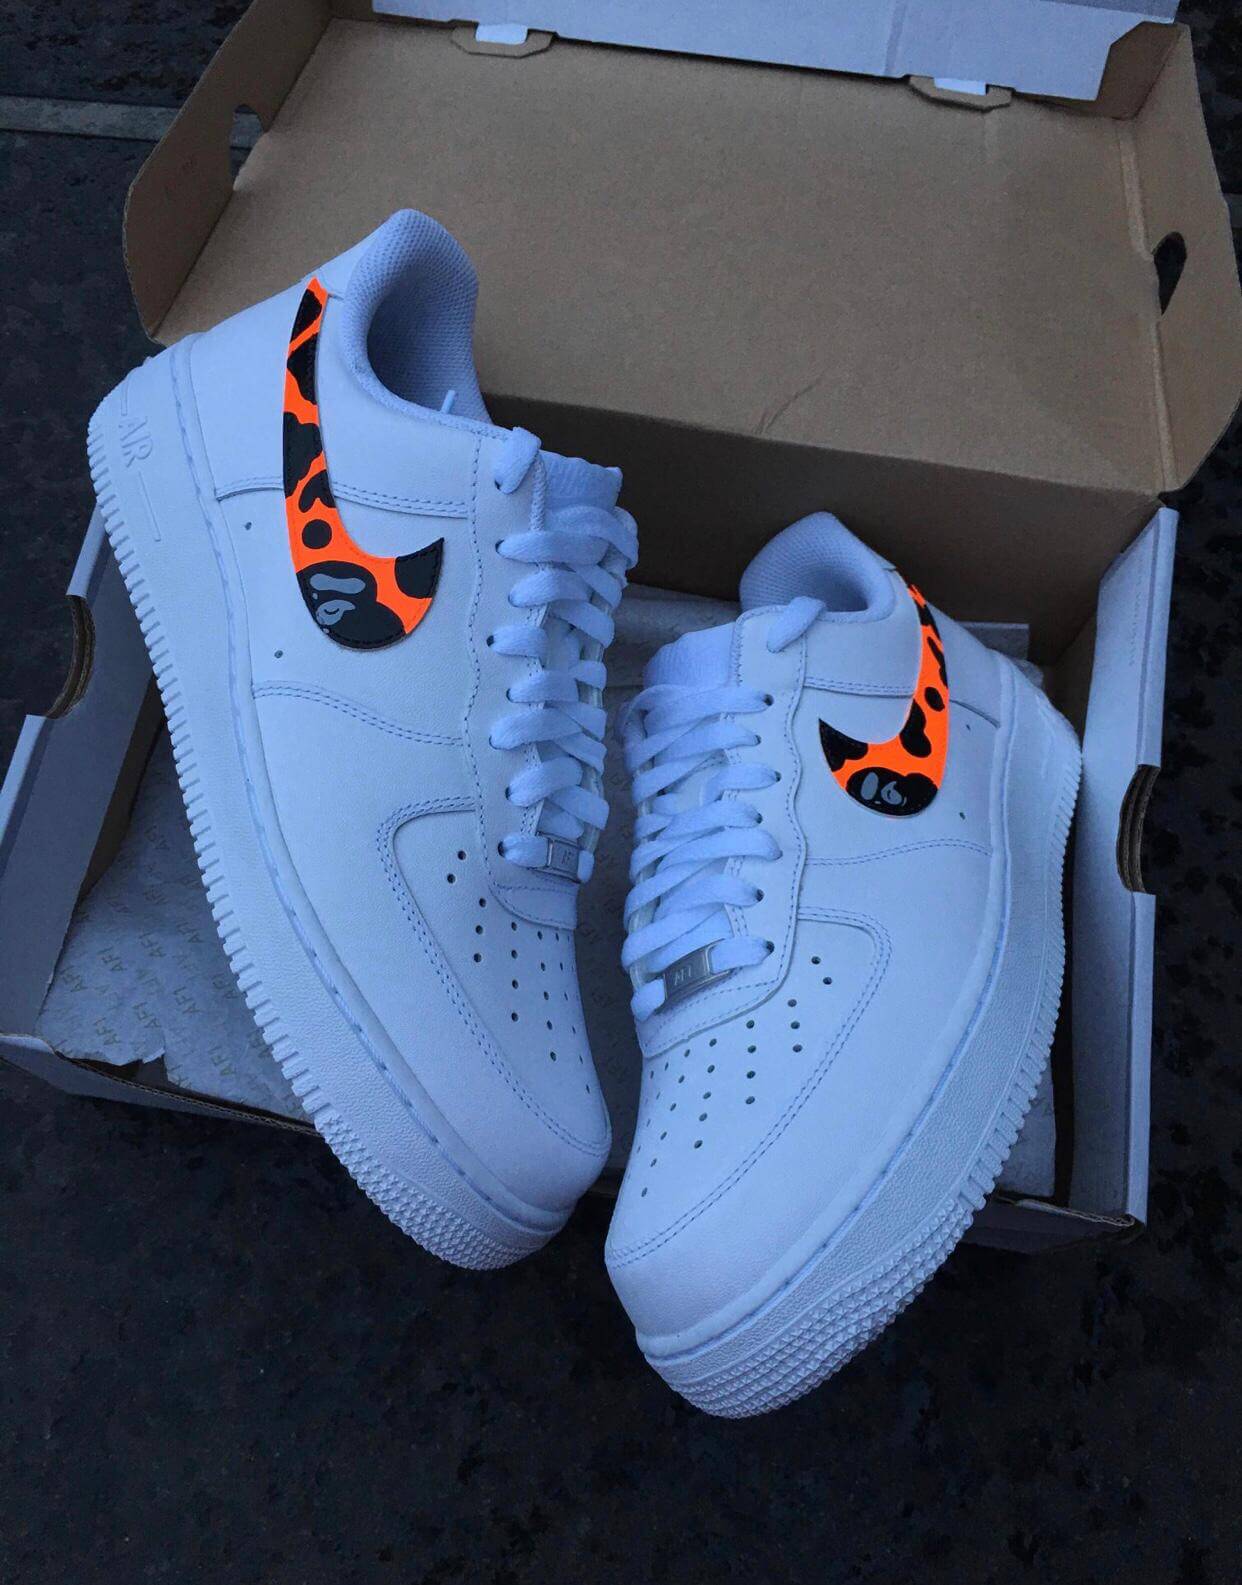 bape neon orange camo air force nike air force 1 sneakers trainers great gift for girls boy hype beasts hypebeasts birthday gifts presents